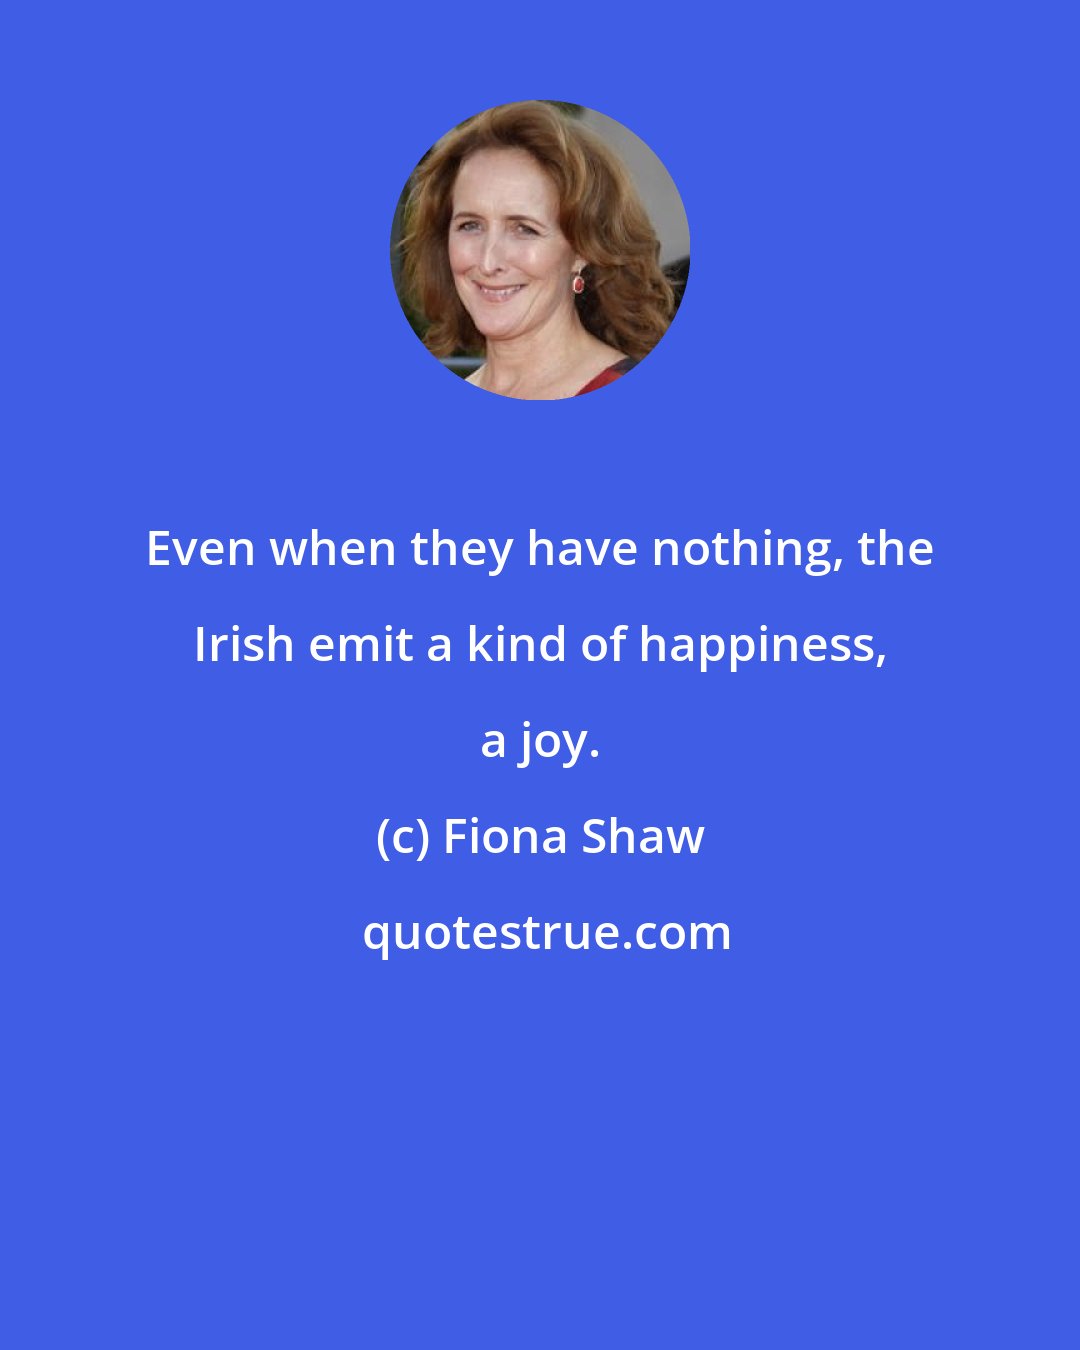 Fiona Shaw: Even when they have nothing, the Irish emit a kind of happiness, a joy.